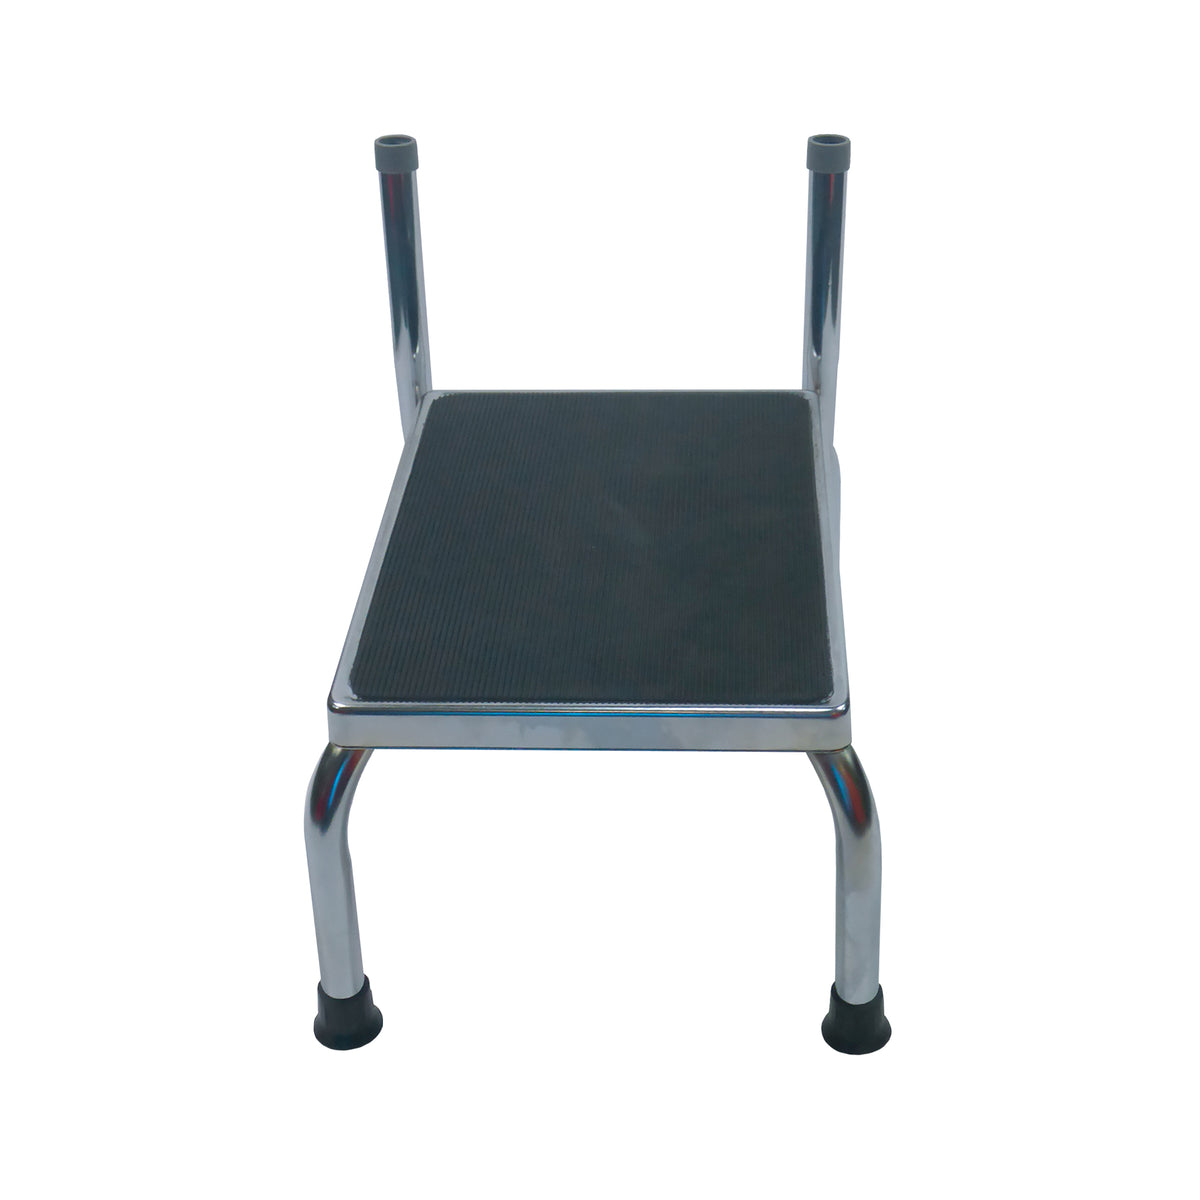 Foot Stool with Removable Handle